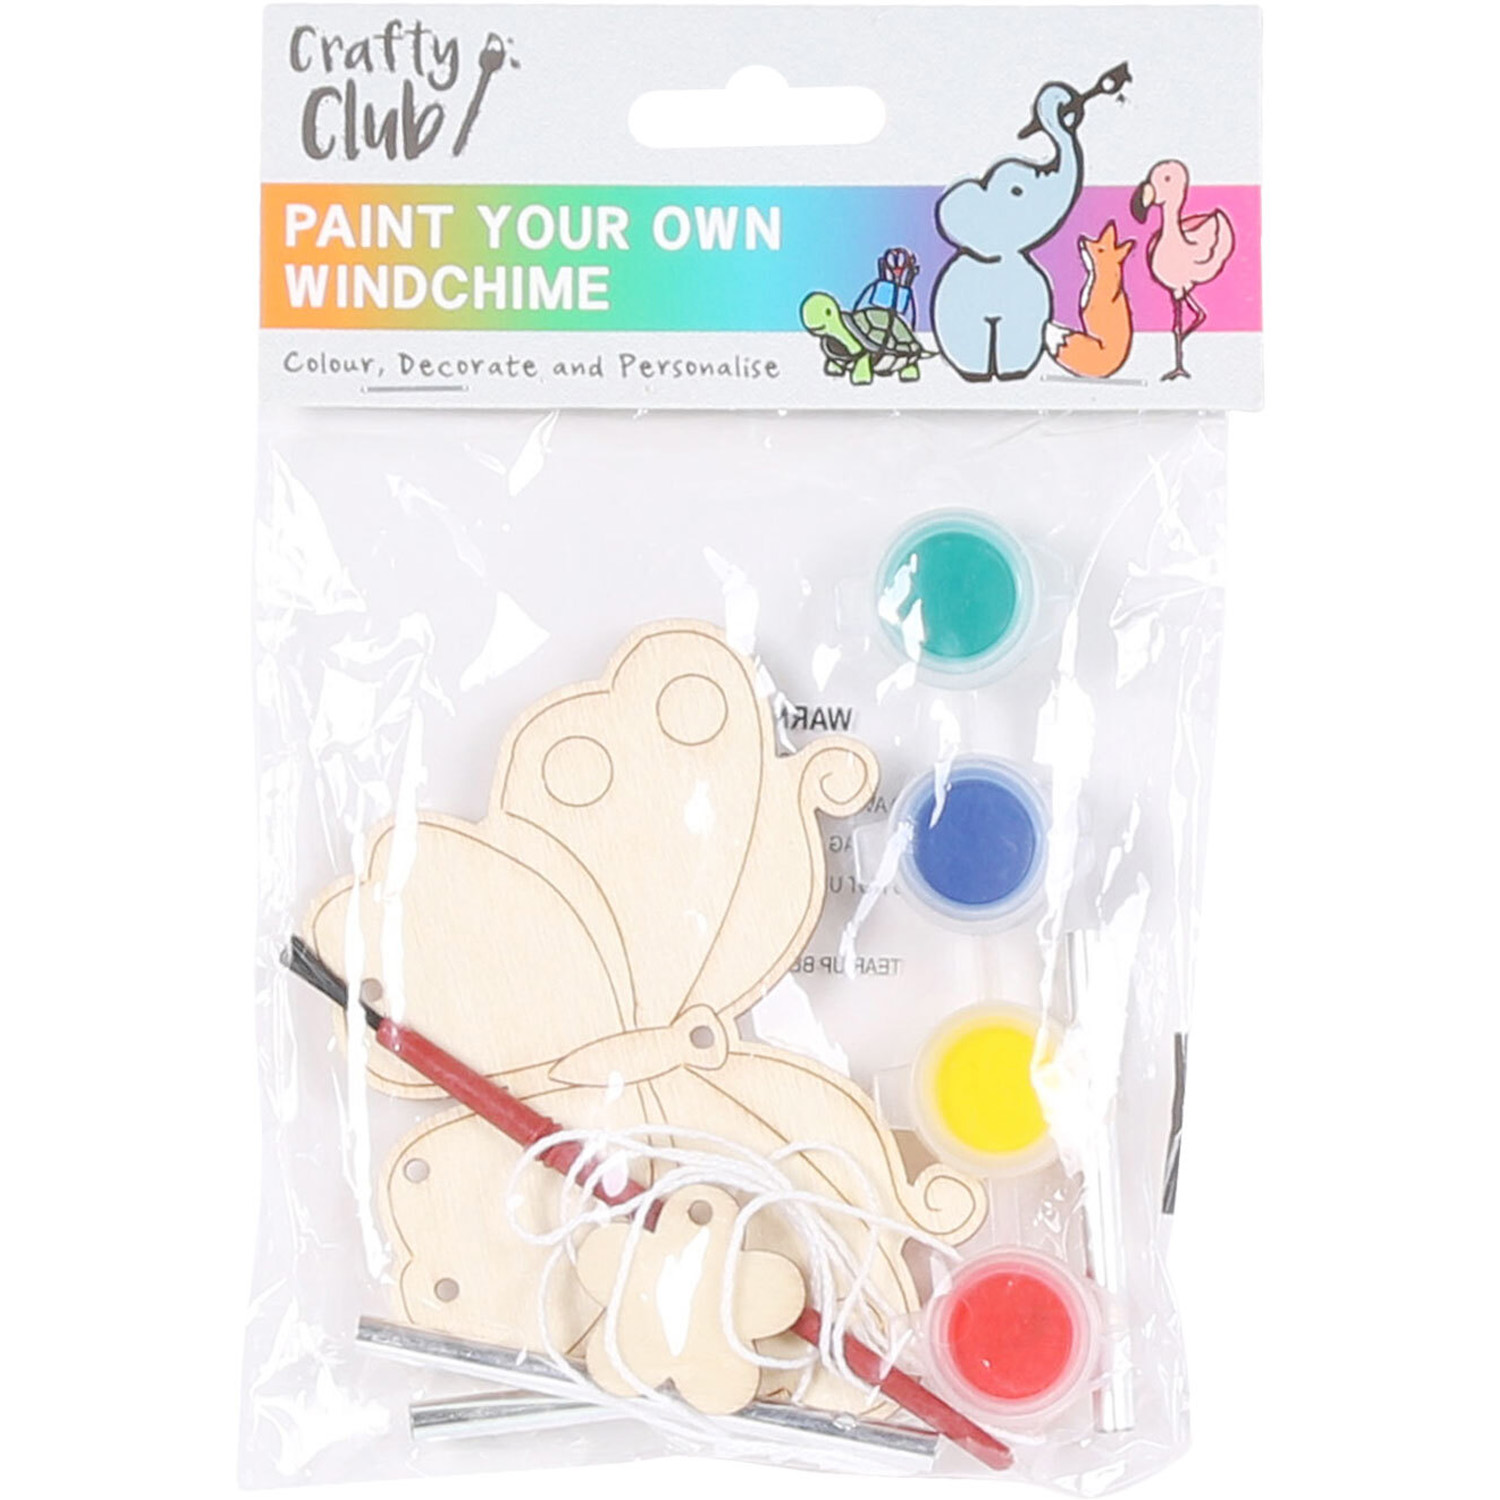 Single Crafty Club Paint Your Own Windchime Kit in Assorted styles Image 2